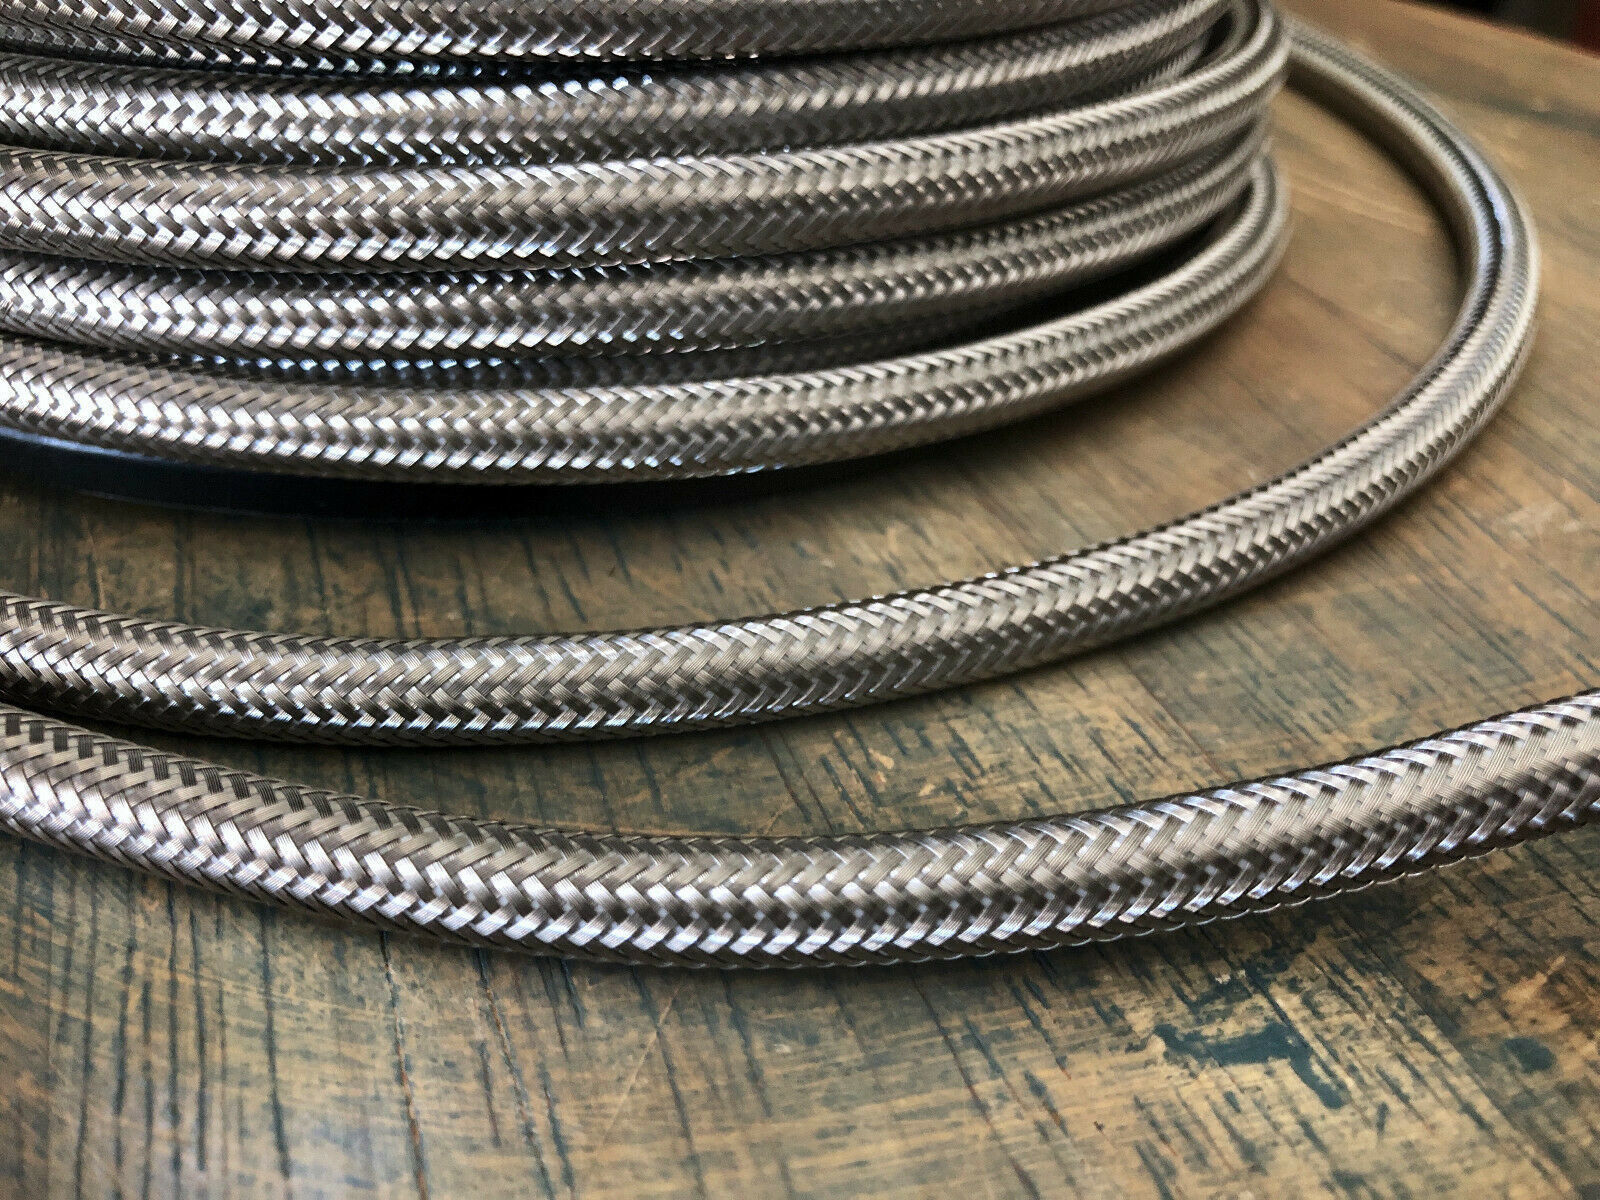 Steel metal cord cover-round 3 wire braided cable, jack mesh-per foot